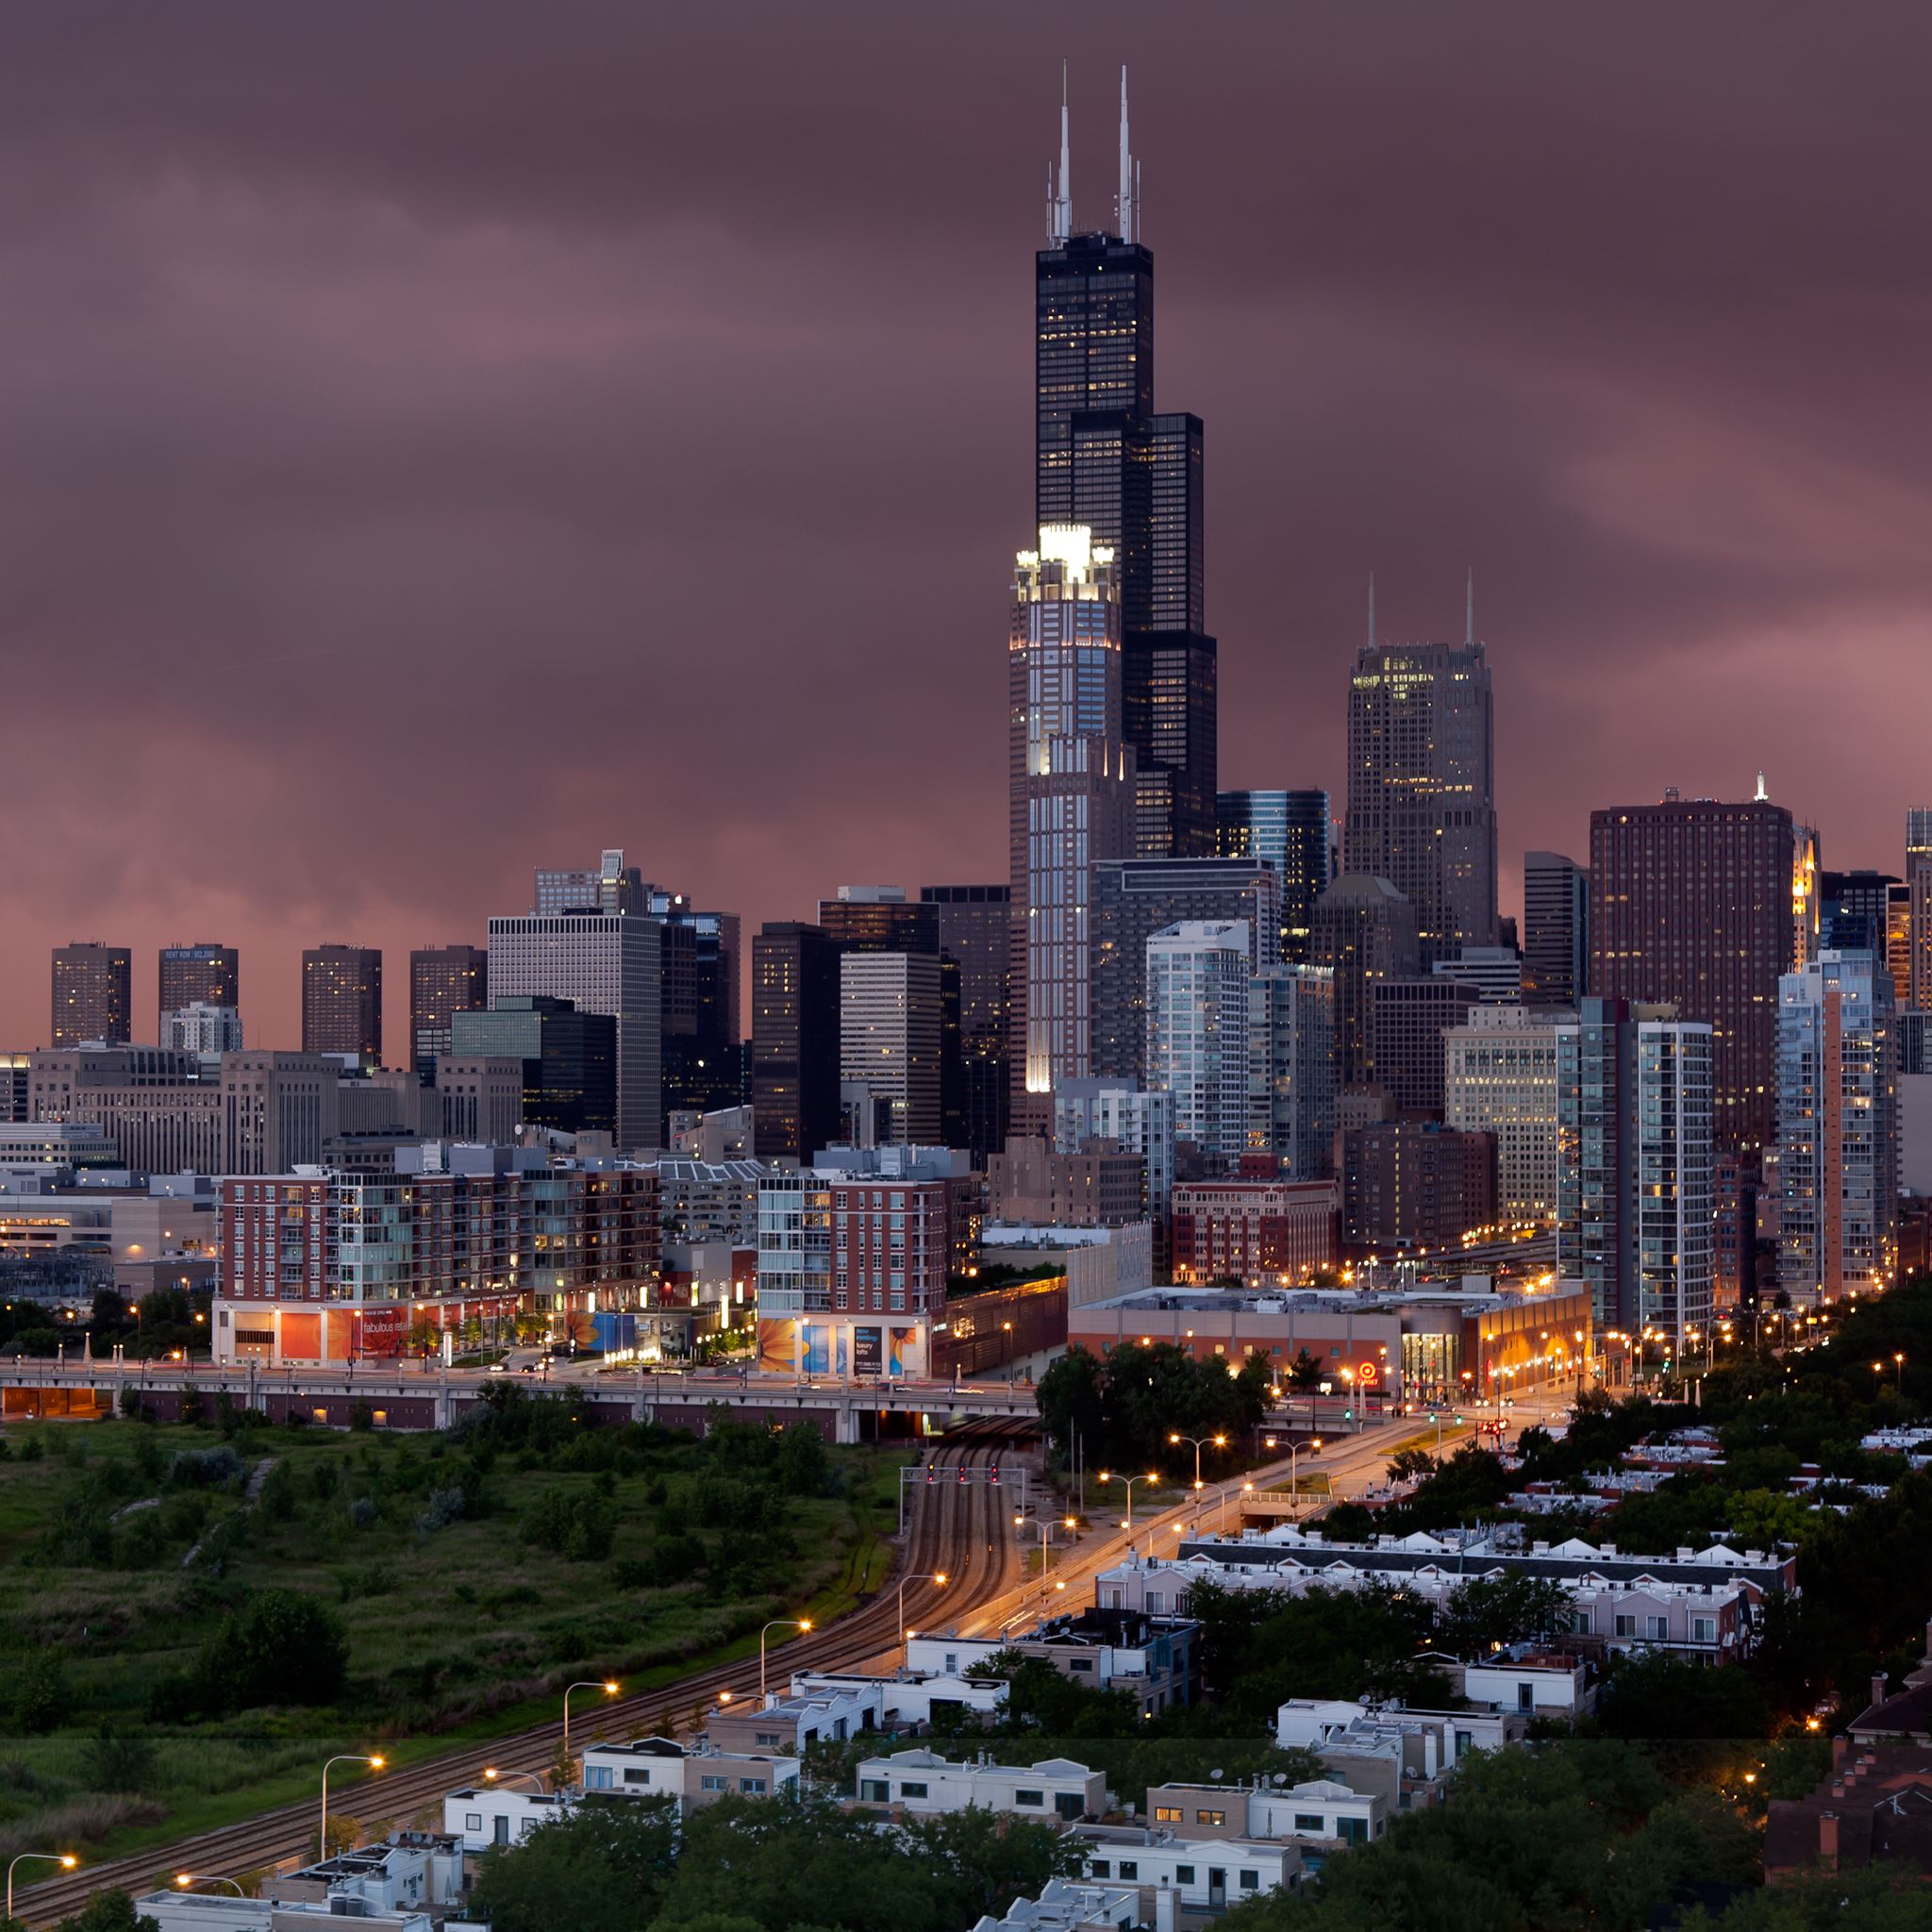 Sunset and Storm in Chicago iPad Air wallpaper 